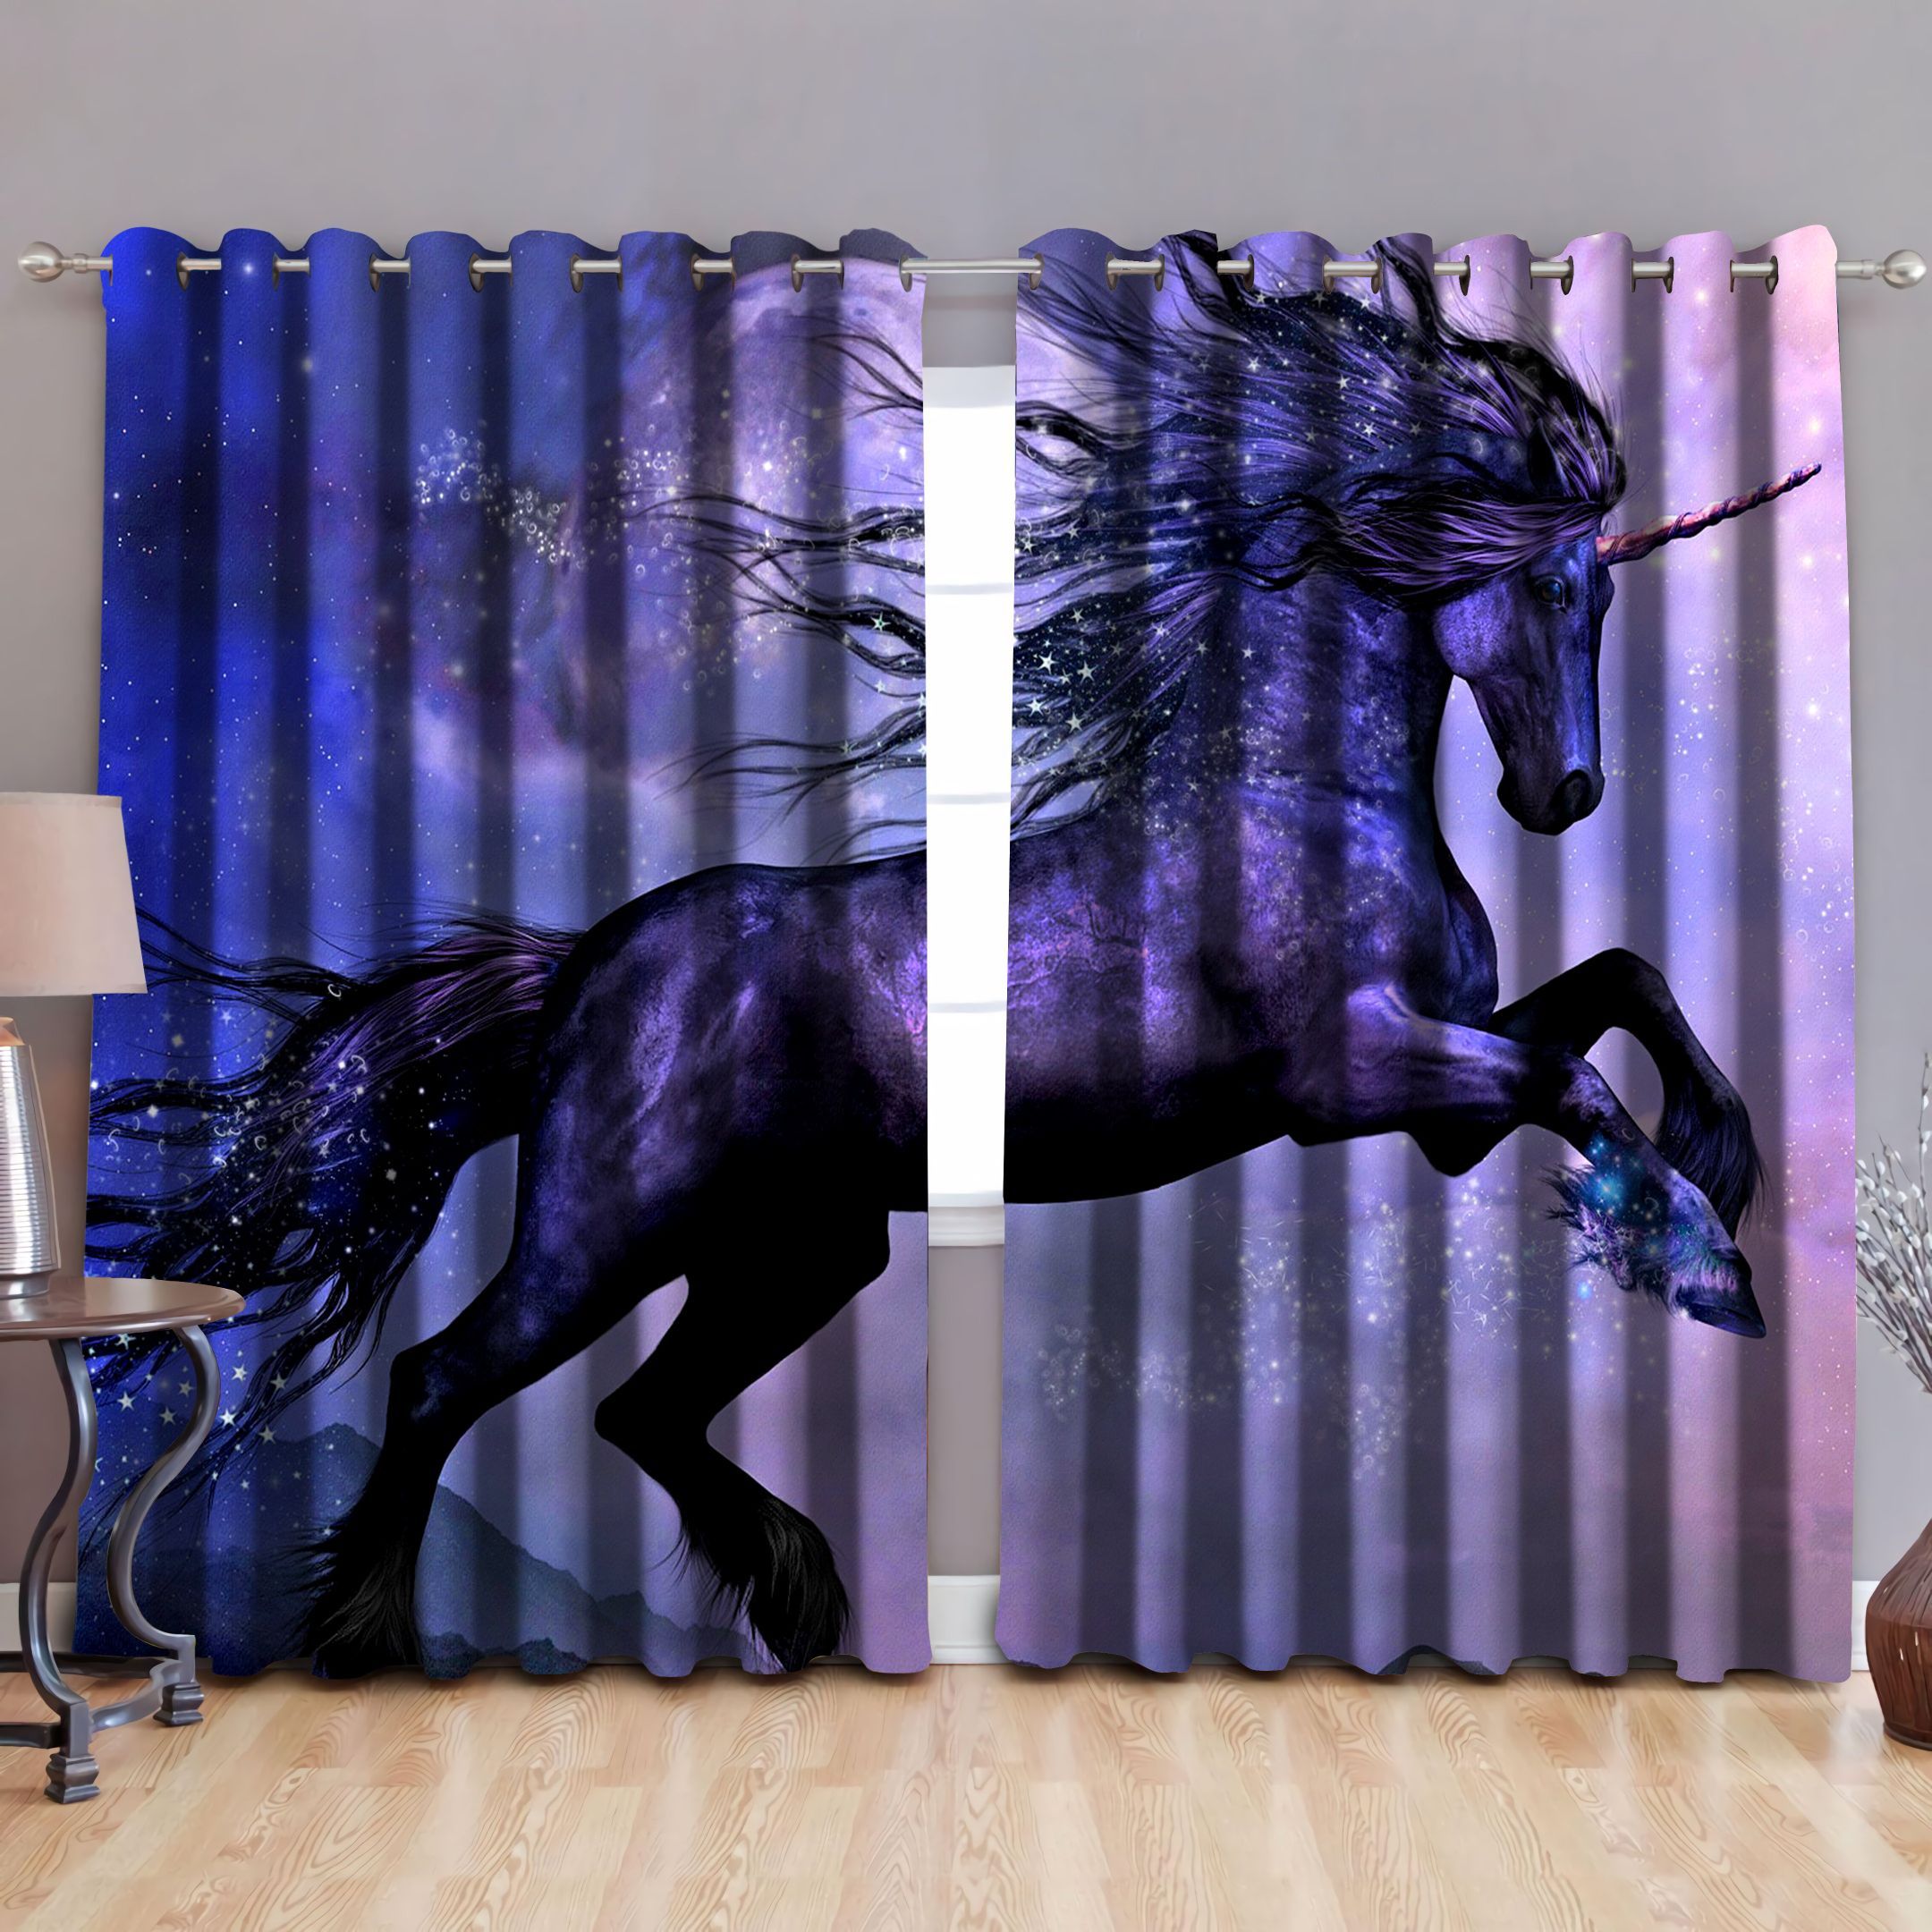 Blue And Purple Miexd Horse Art Printed Window Curtain